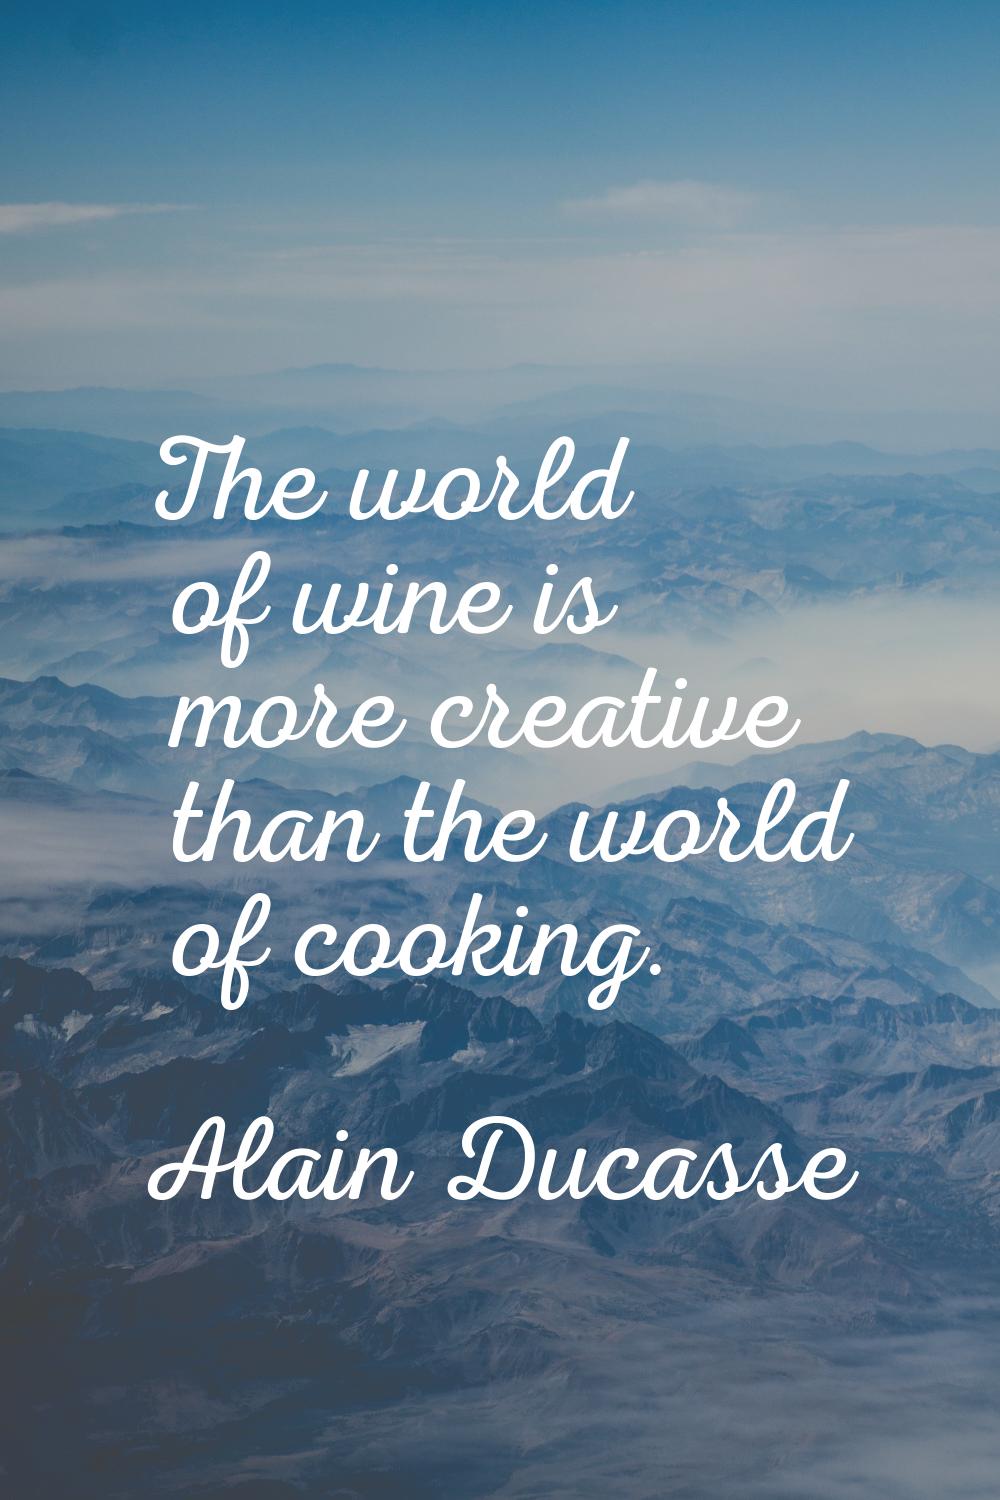 The world of wine is more creative than the world of cooking.